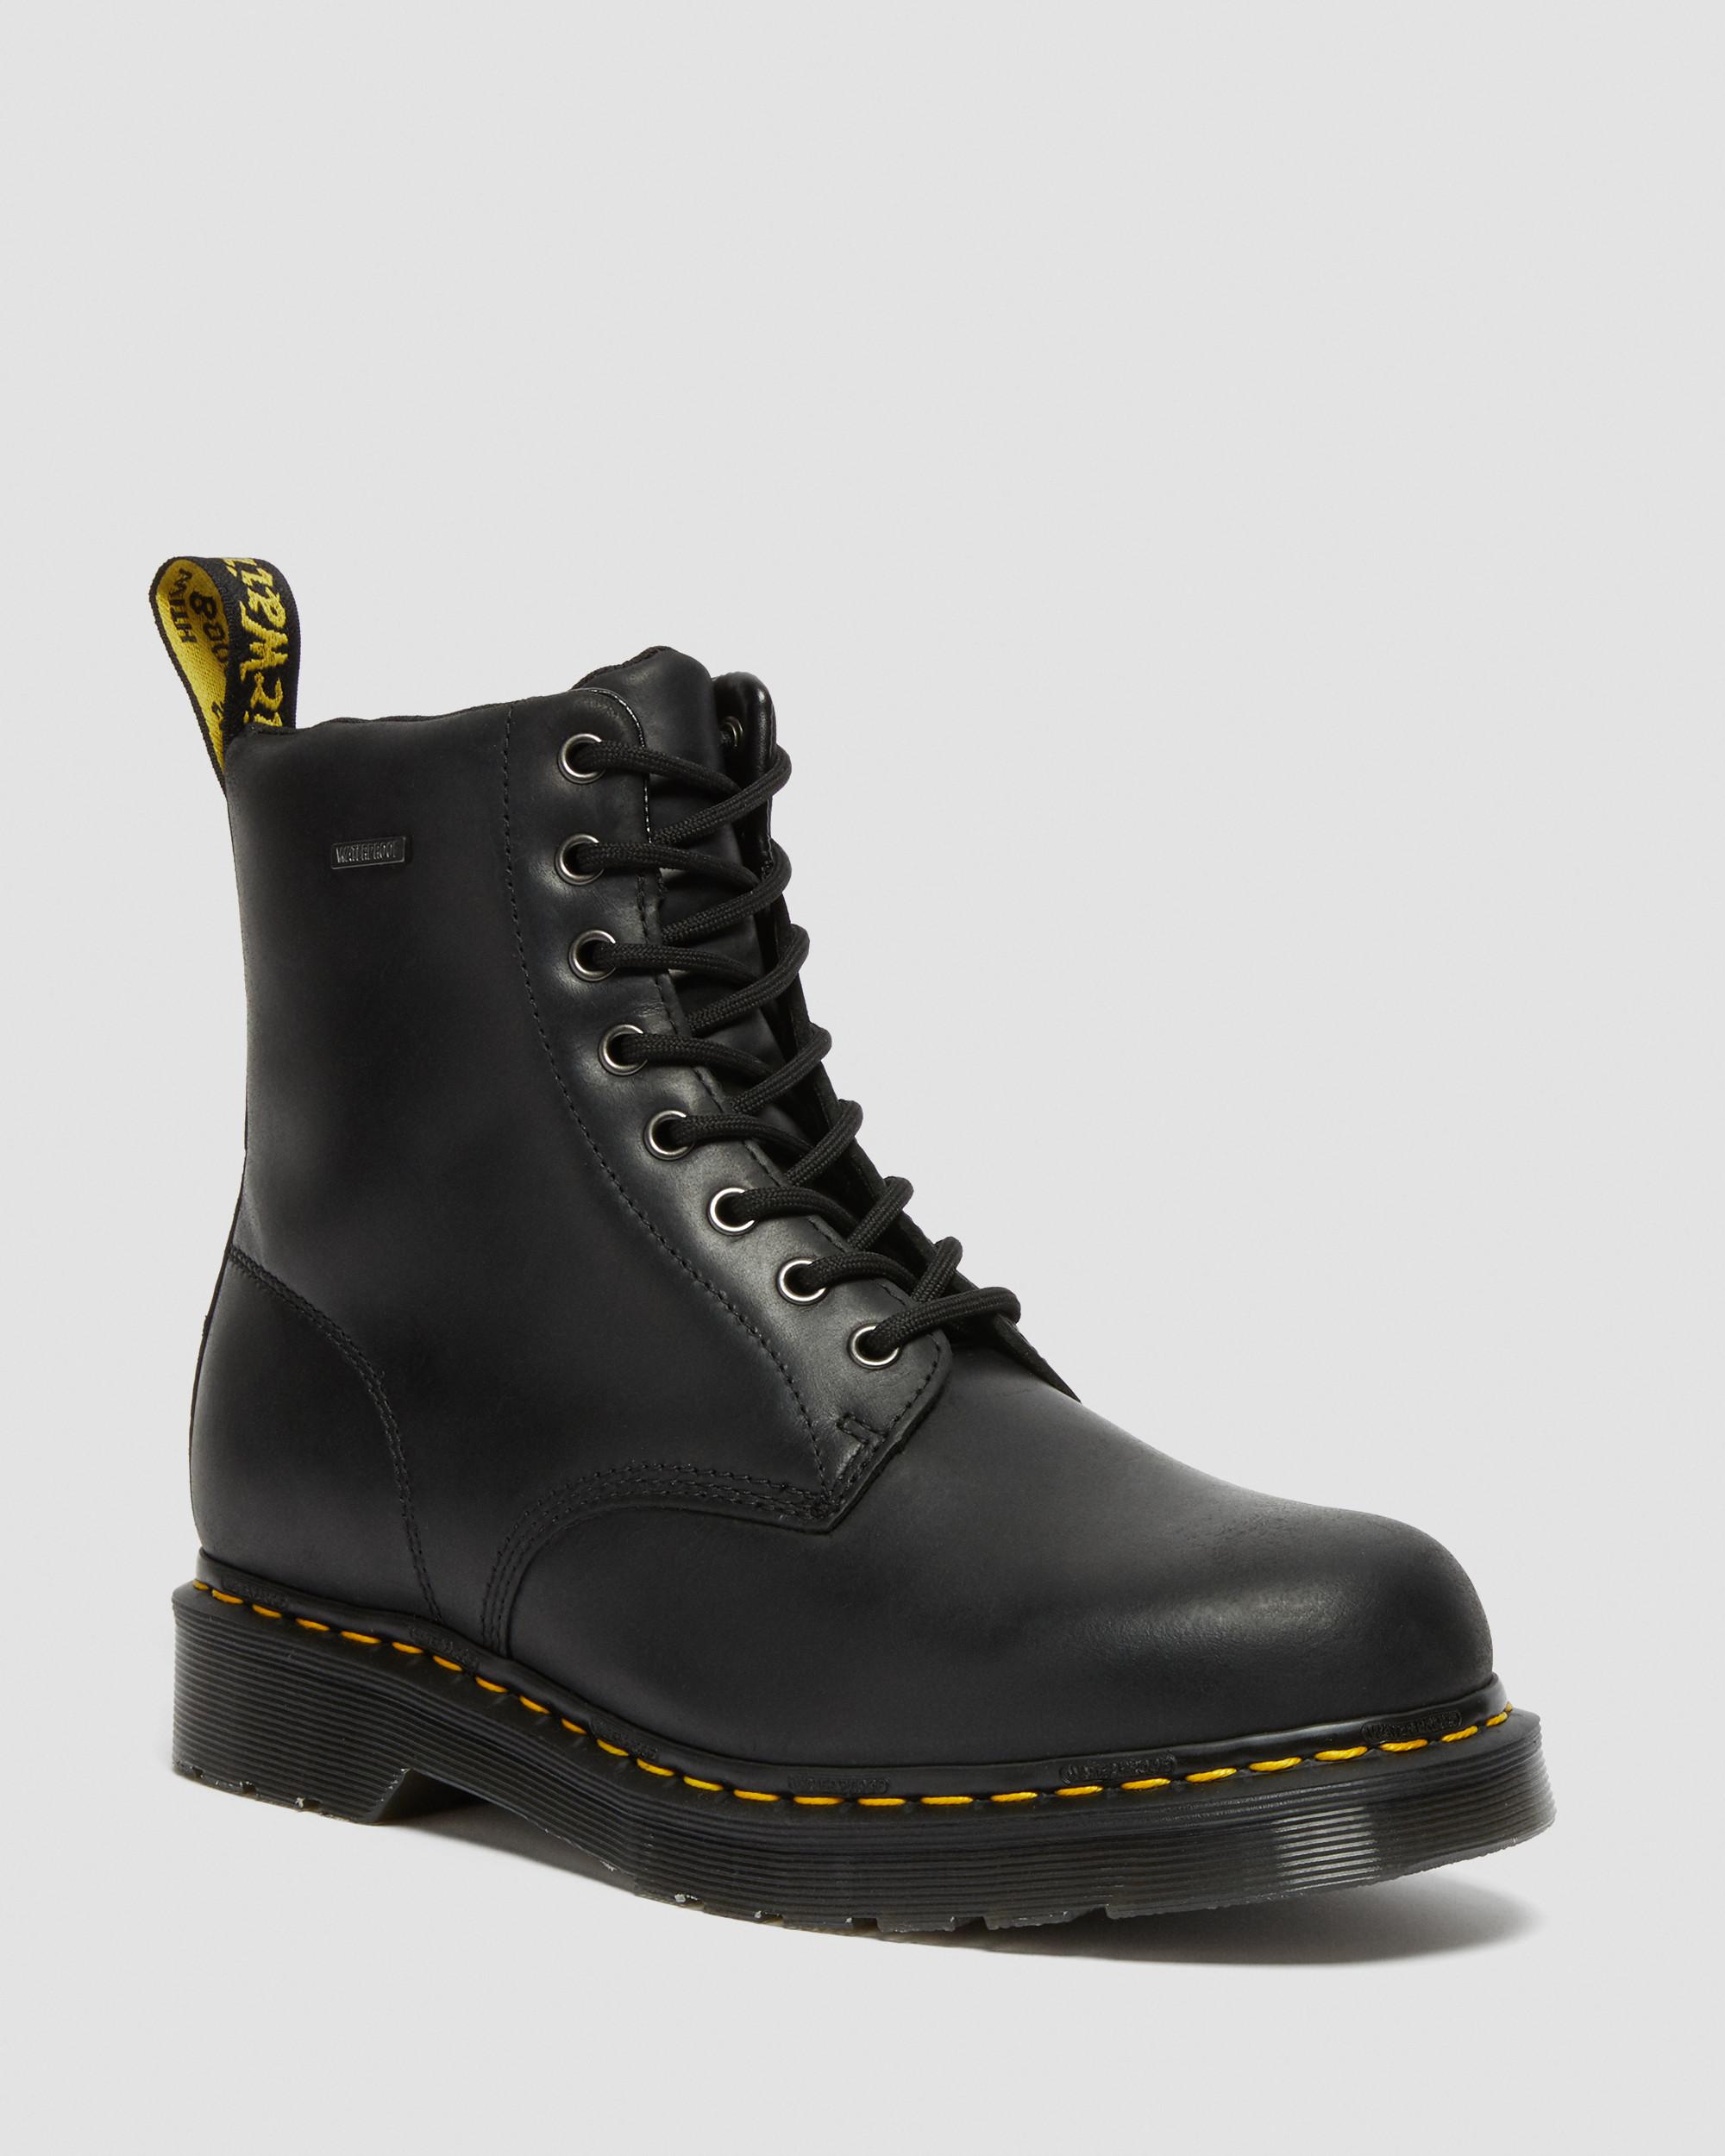 WATERPROOF LACE UP BOOTS | Dr. Martens 